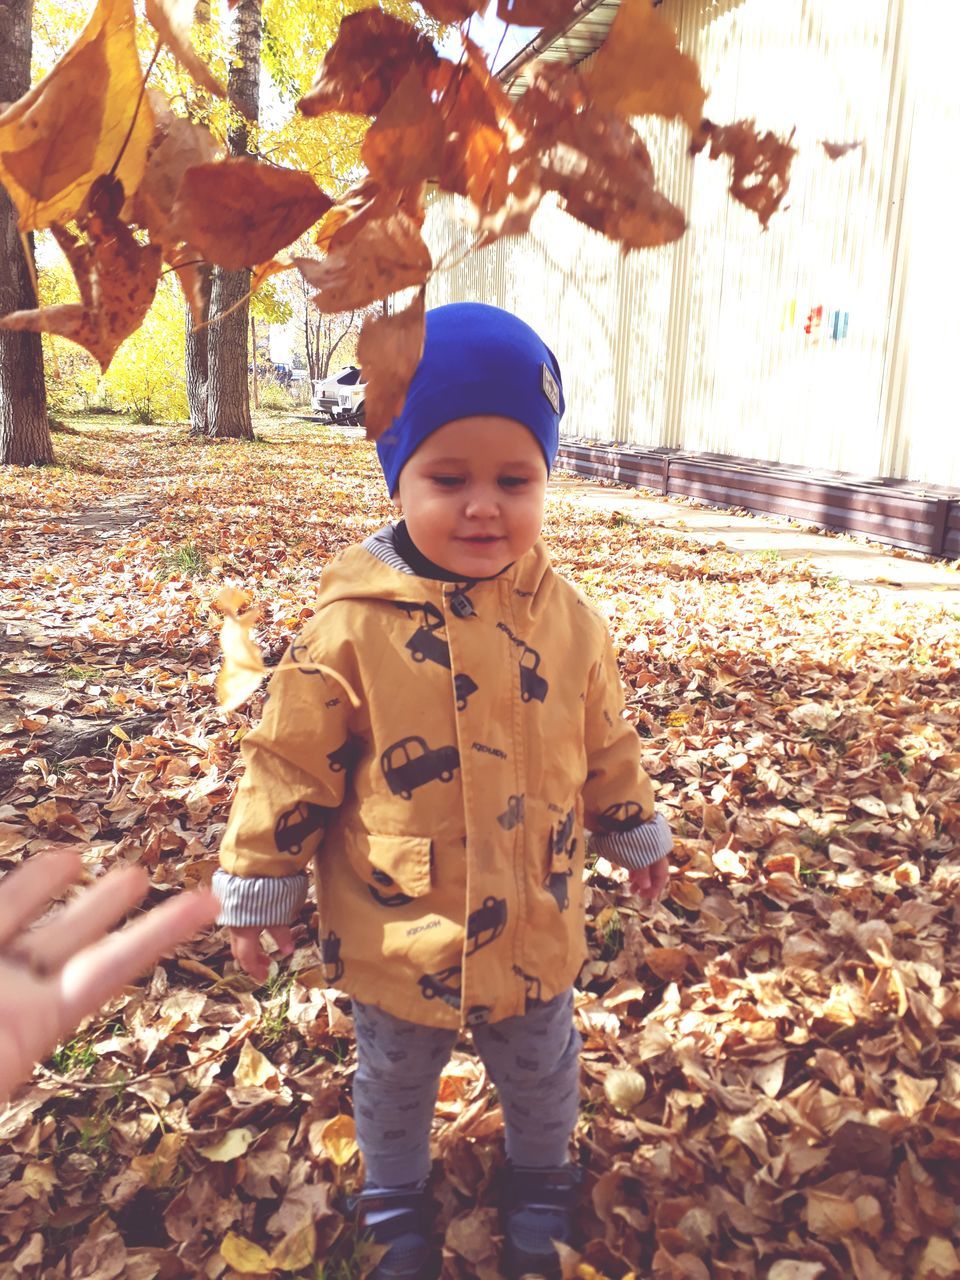 child, childhood, leaf, plant part, real people, autumn, change, boys, one person, nature, standing, front view, day, land, males, cute, leisure activity, girls, leaves, innocence, outdoors, warm clothing